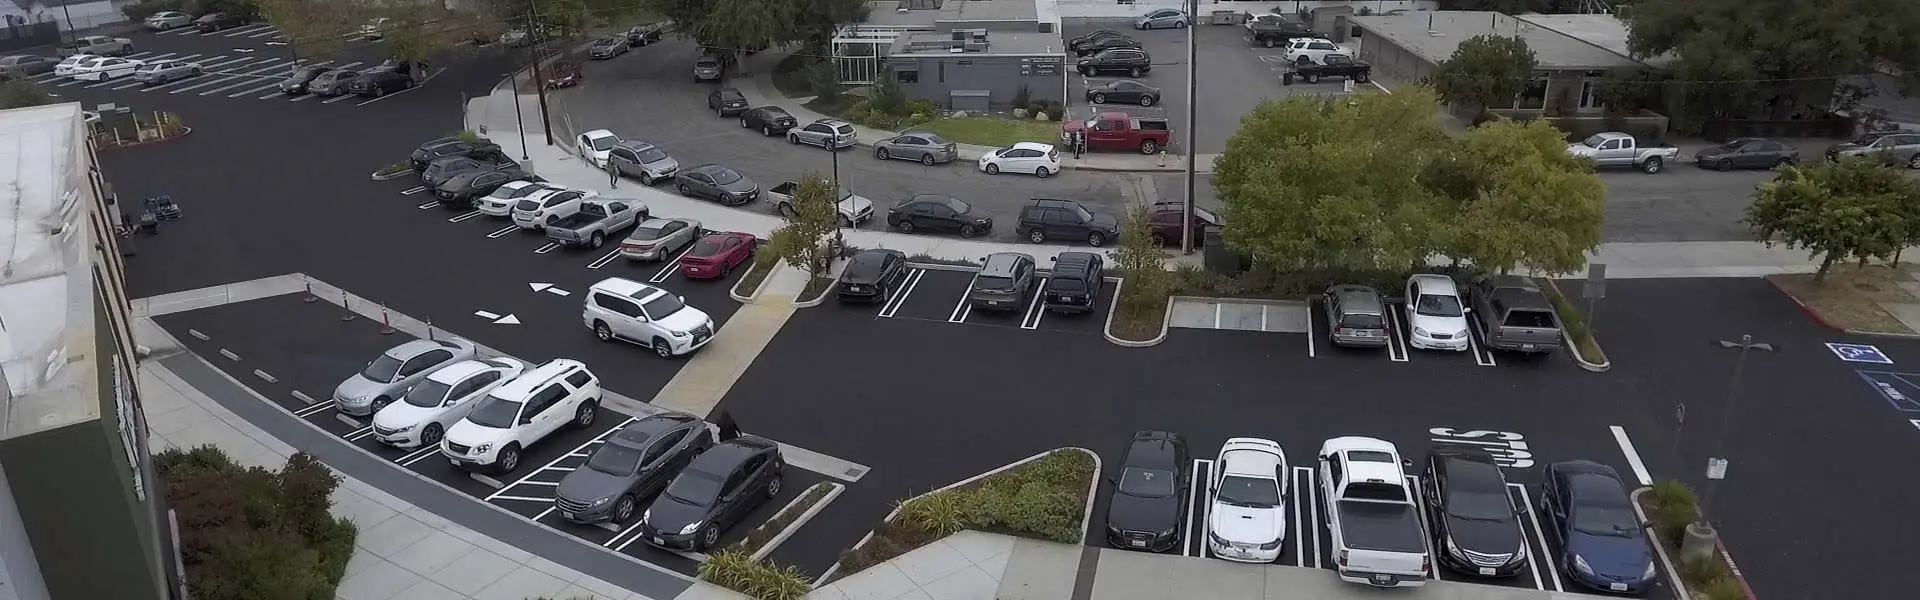 An asphalt parking lot after GPM completed pavement marking and striping.